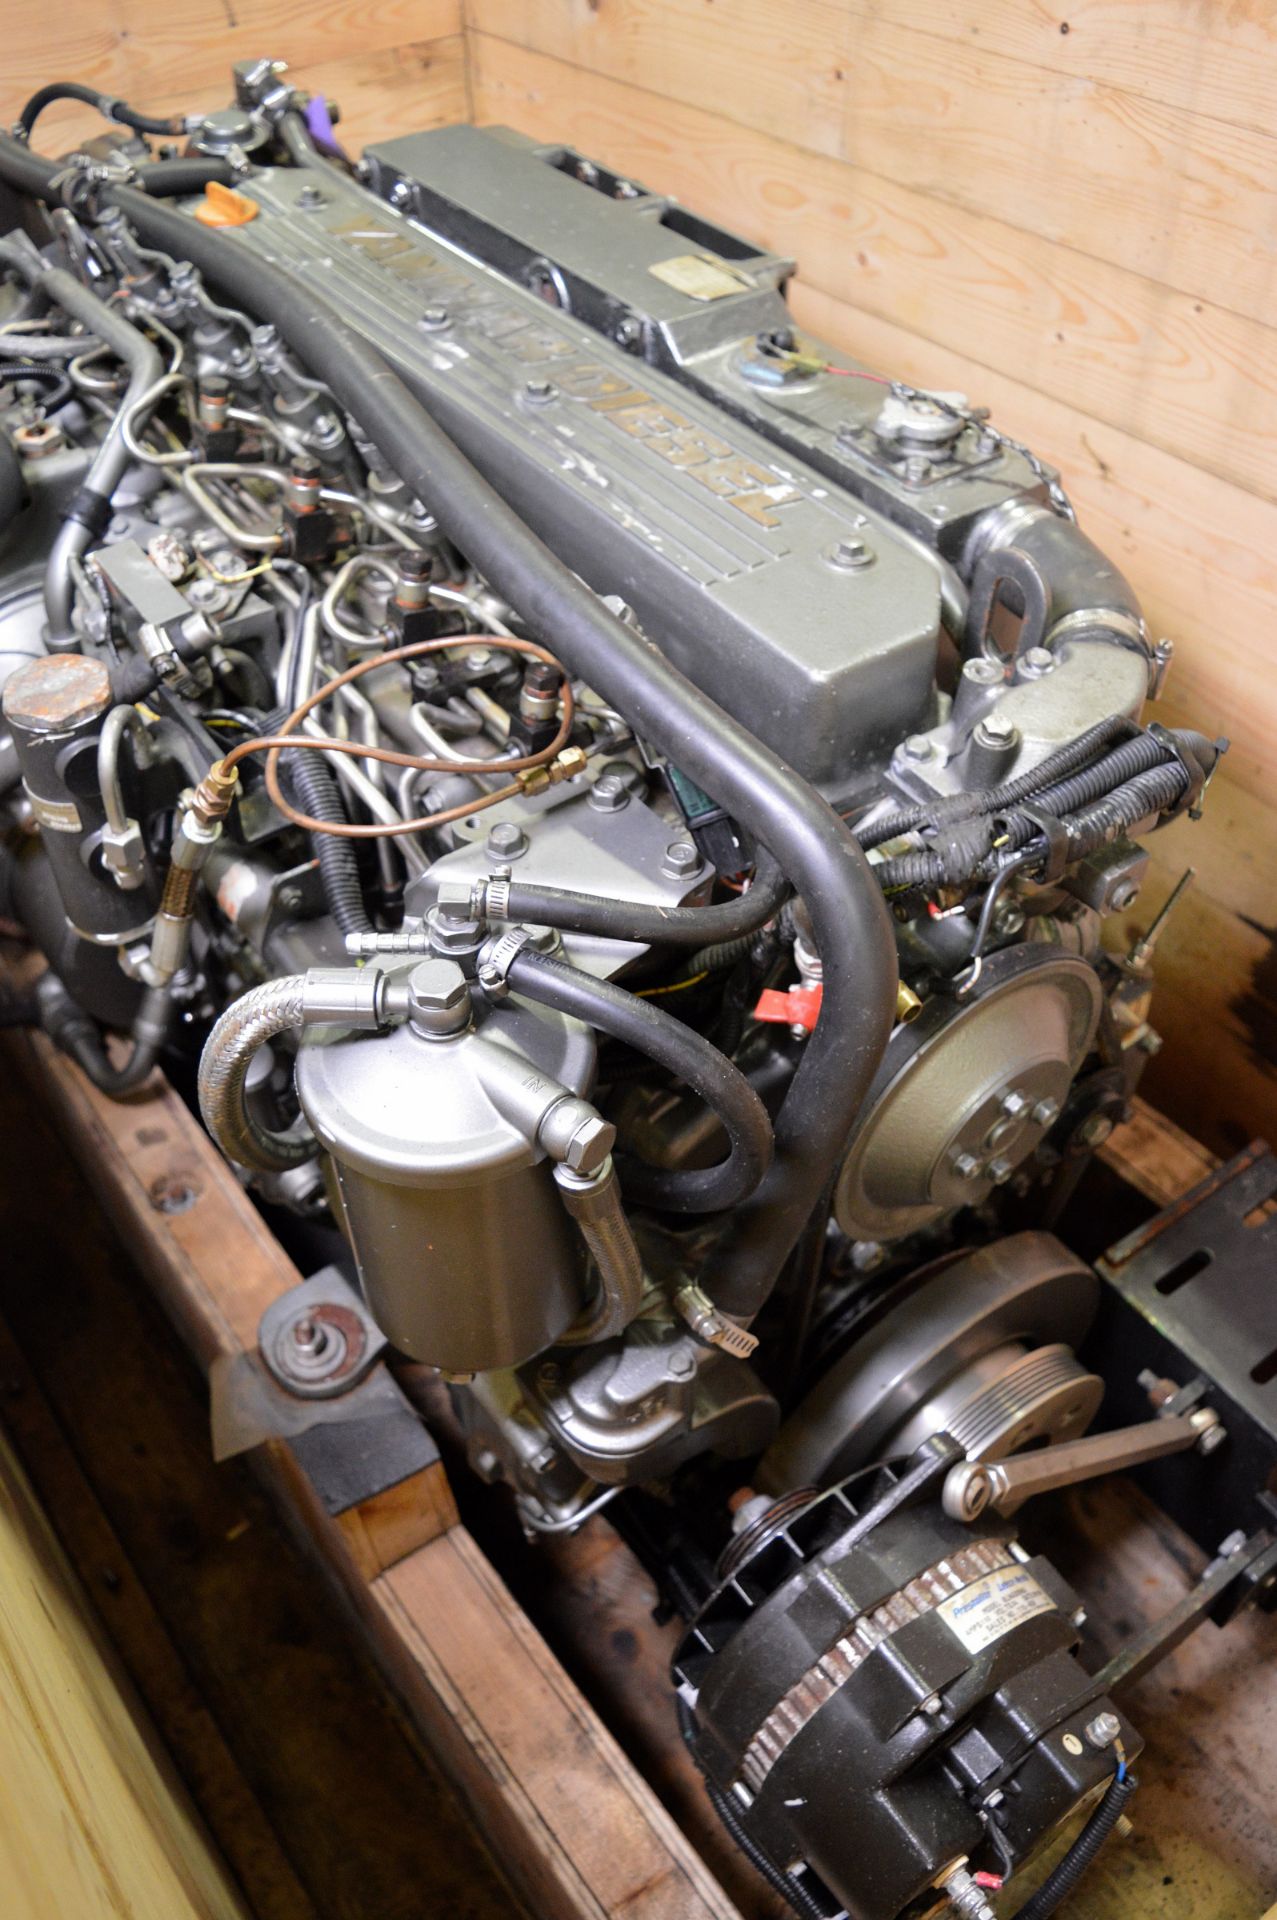 Yanmar RCD-6LY2X1 Diesel Boat Engine - 6LY2A-STP - 324kW (434HP) - Details in the description - Image 7 of 19